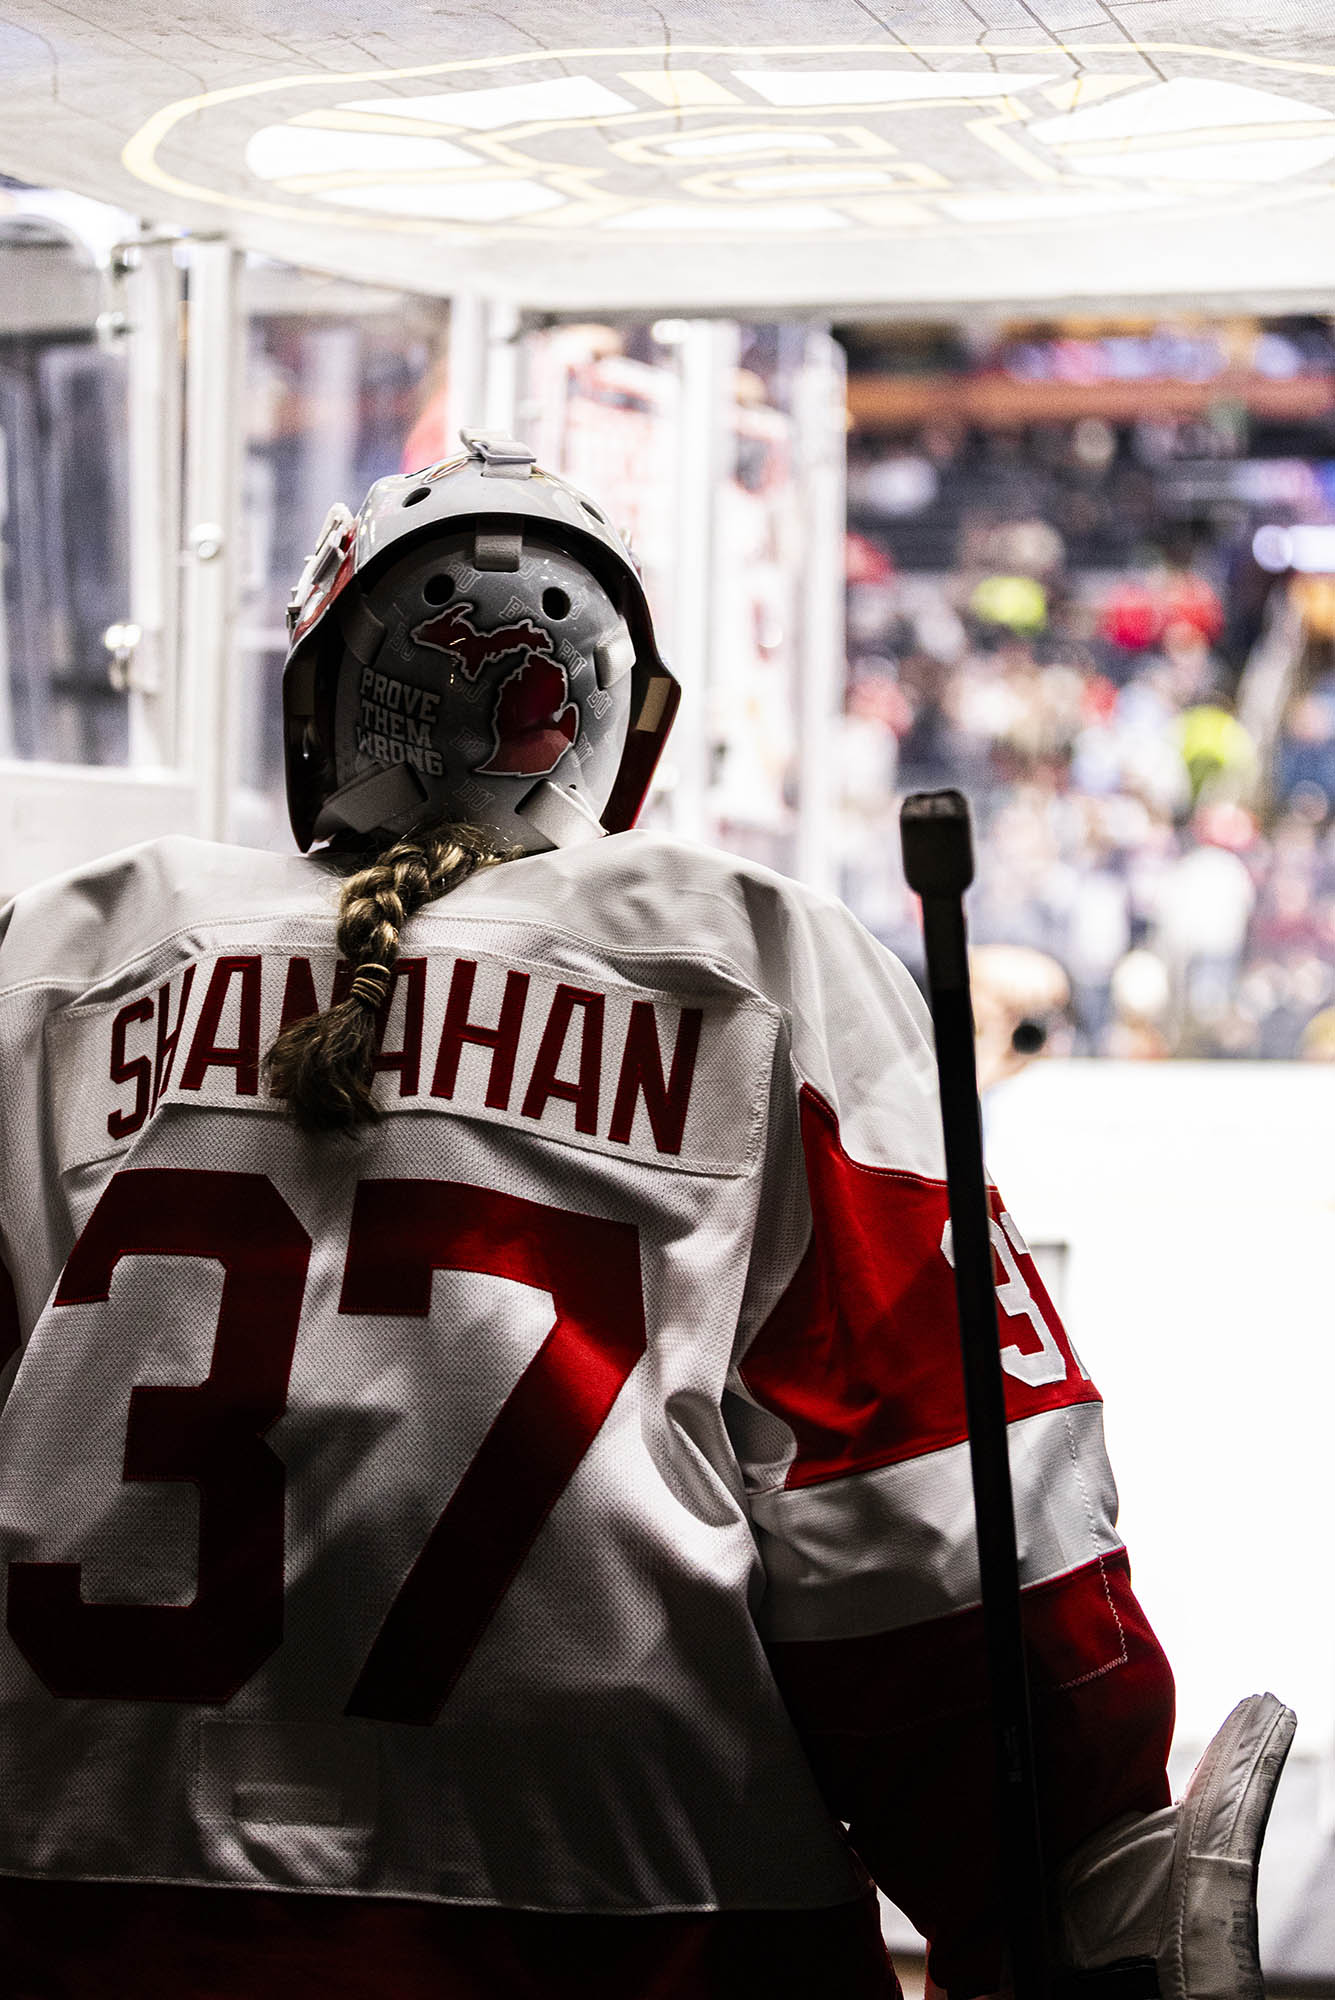 Photo: Callie Shanahan, BU's goalie, goes to step onto the ice geared up in her white uniform.